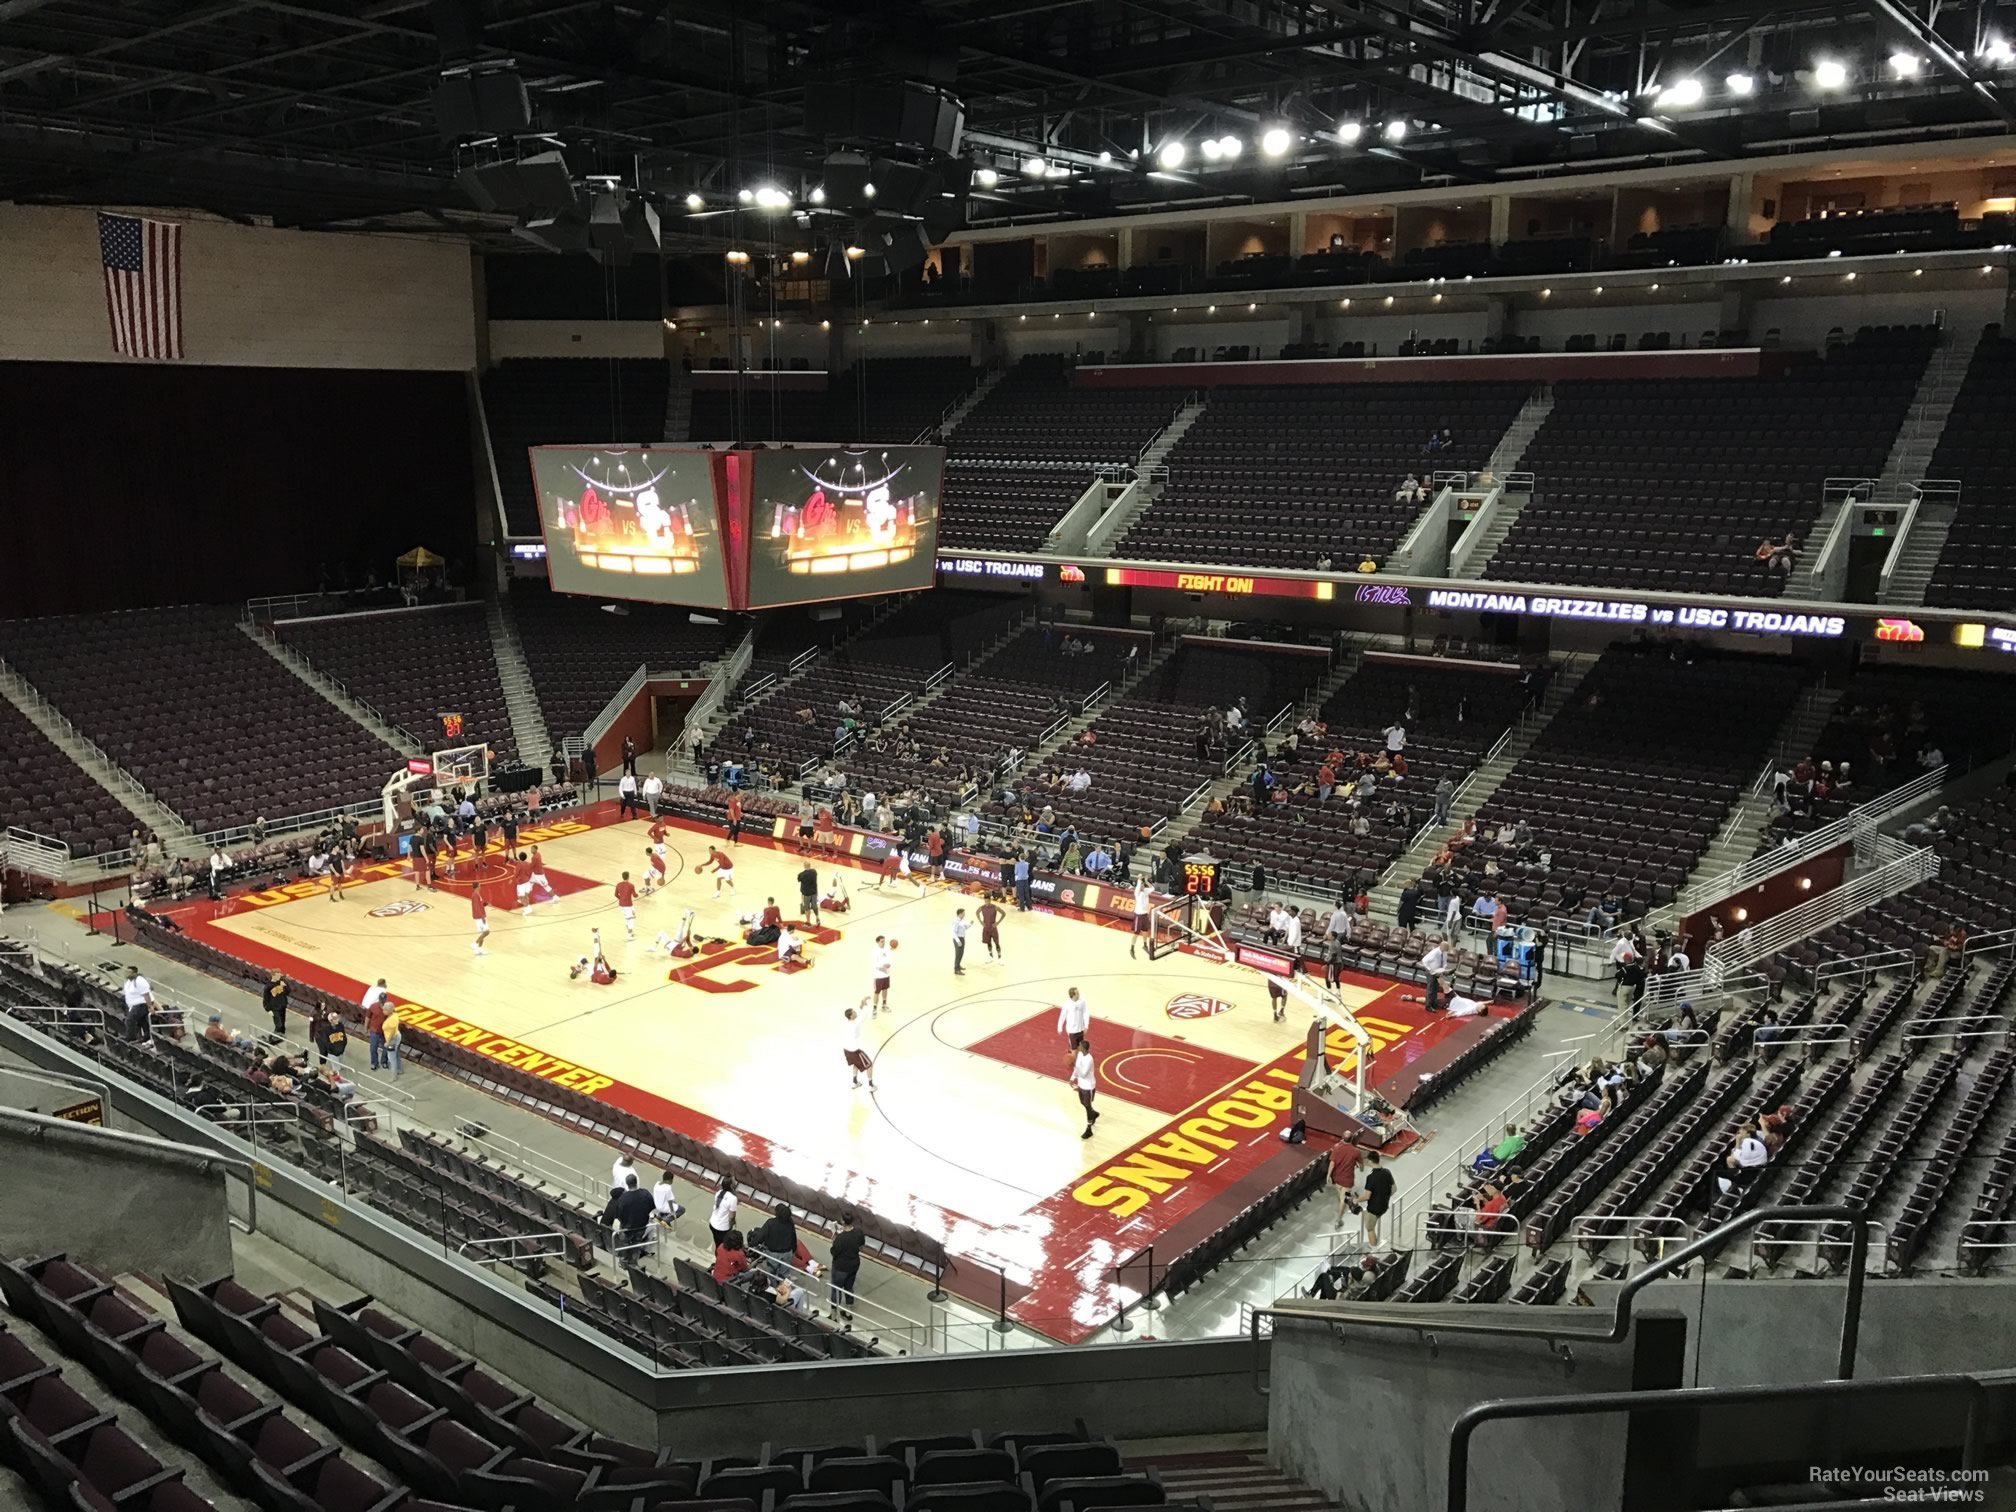 section 208, row 10 seat view  - galen center